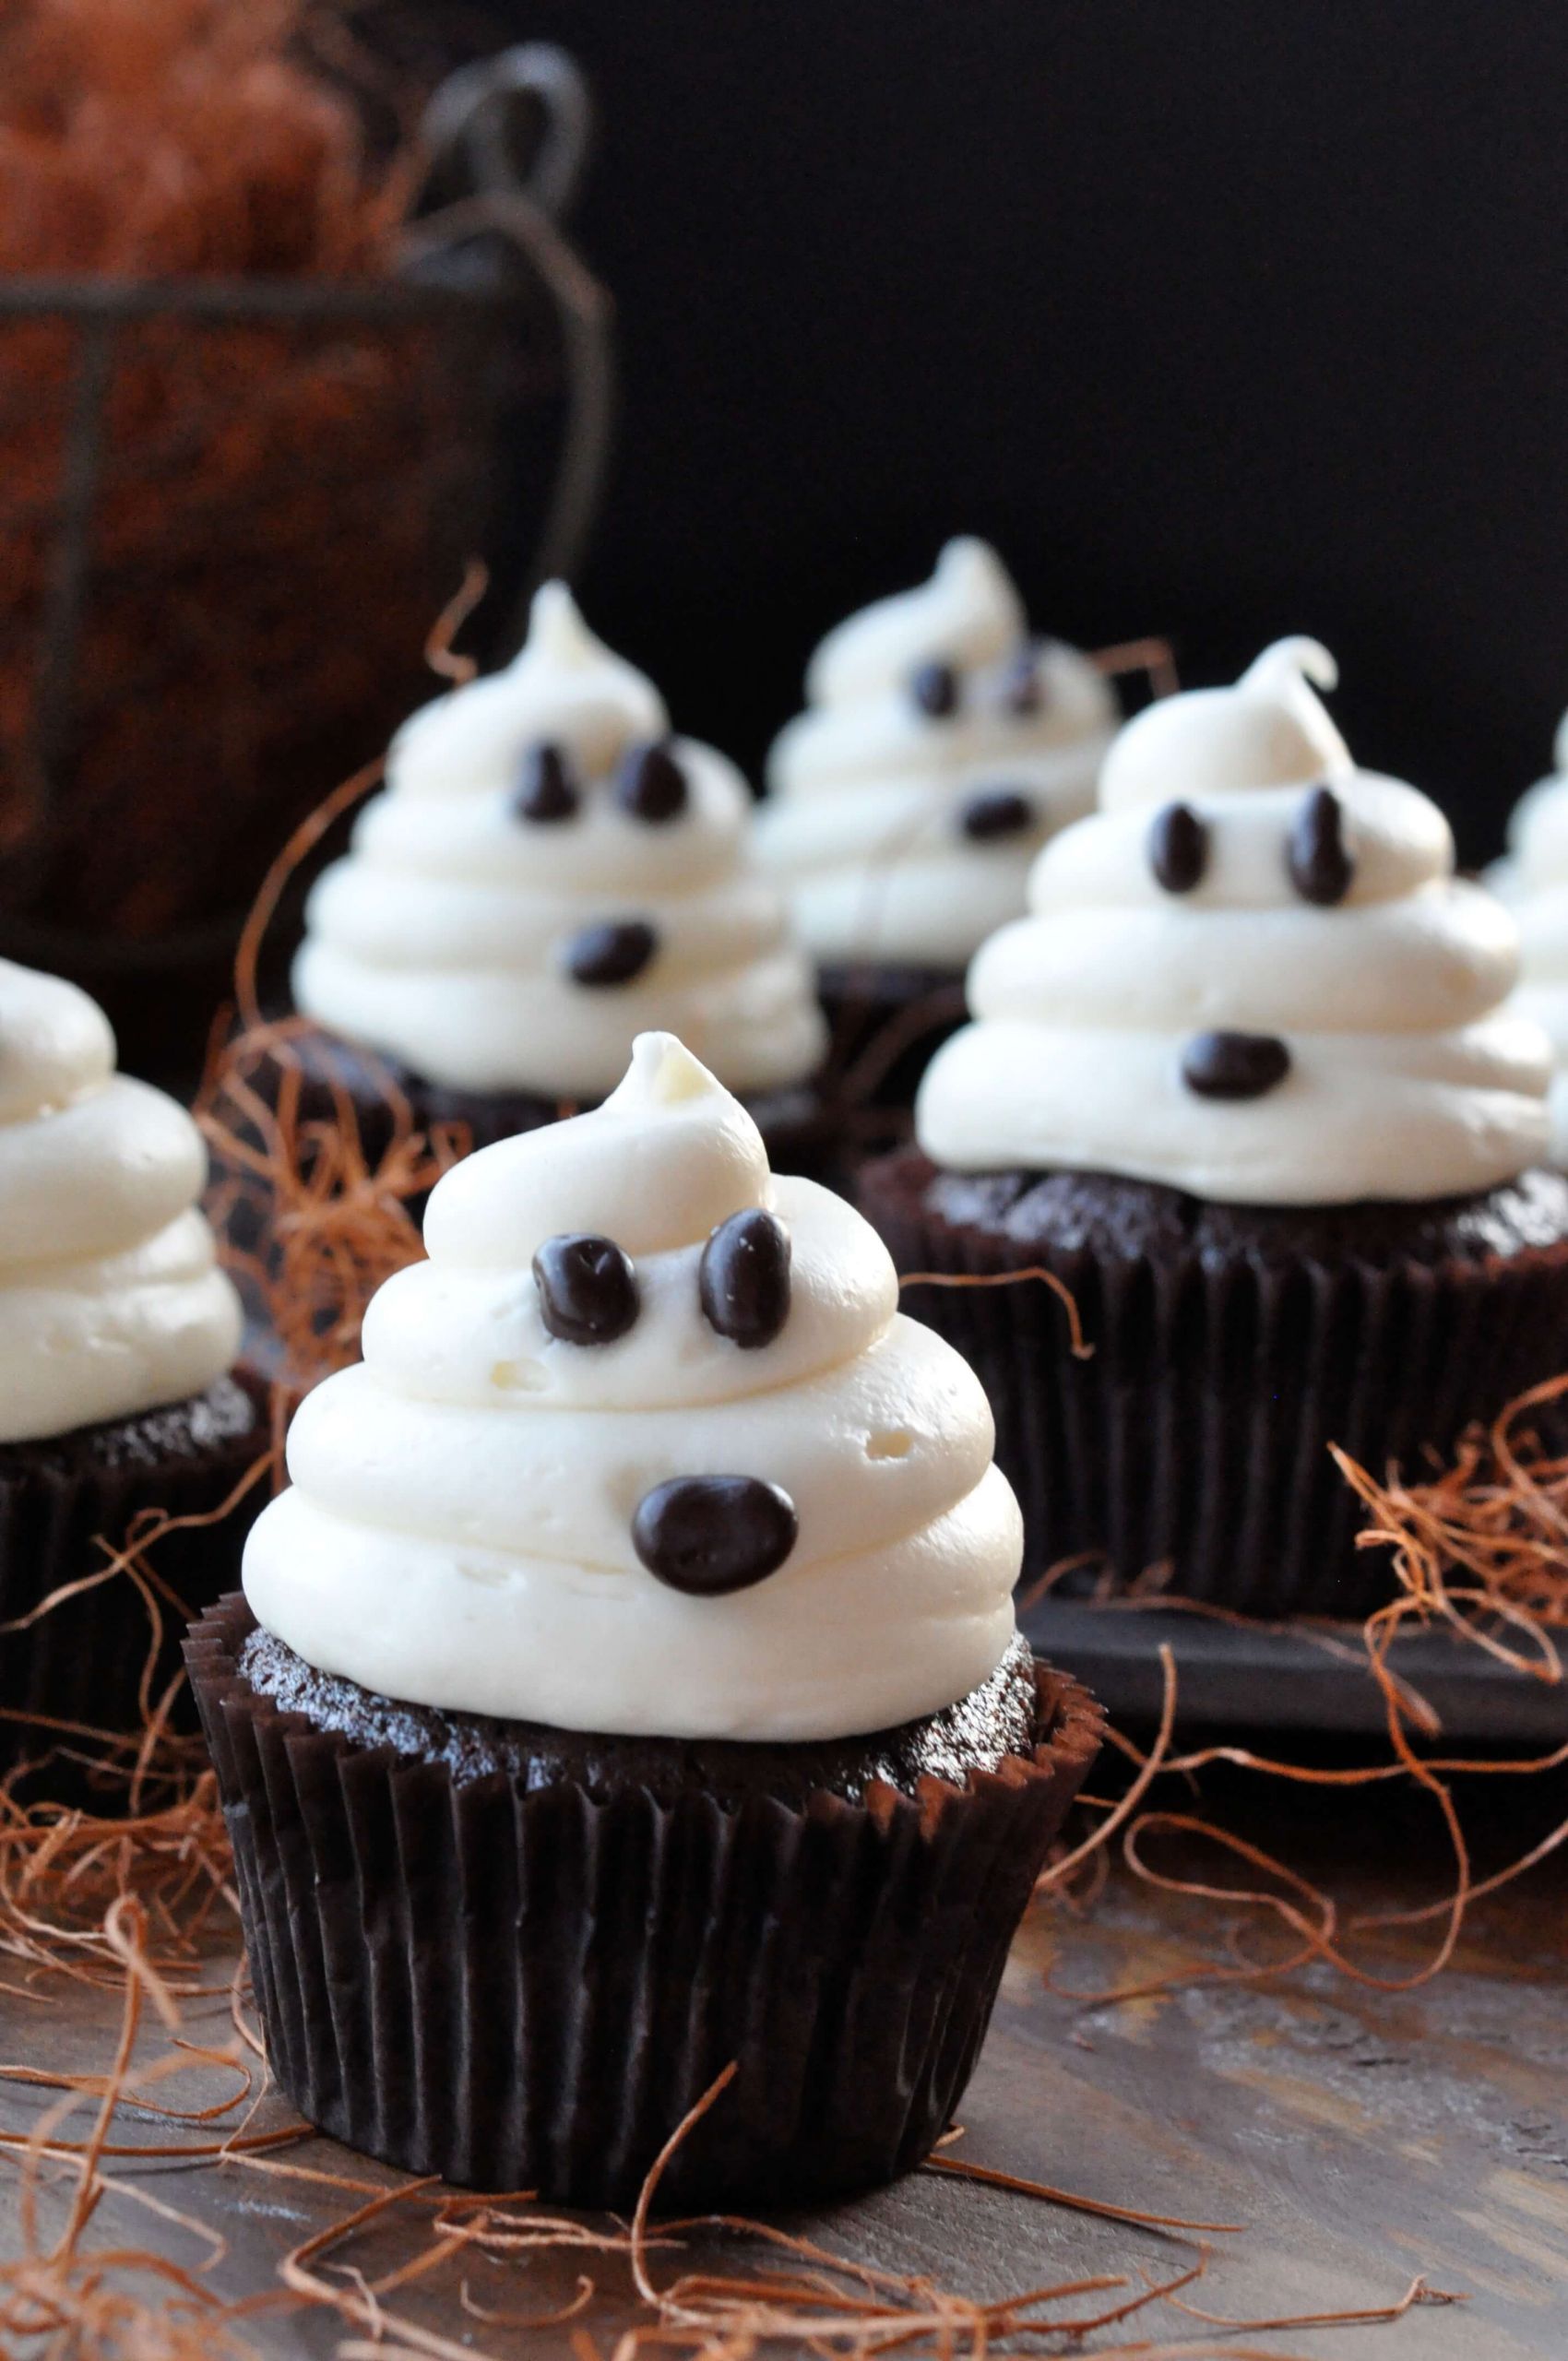 The 22 Best Ideas for Halloween Cupcakes Cake - Home, Family, Style and ...